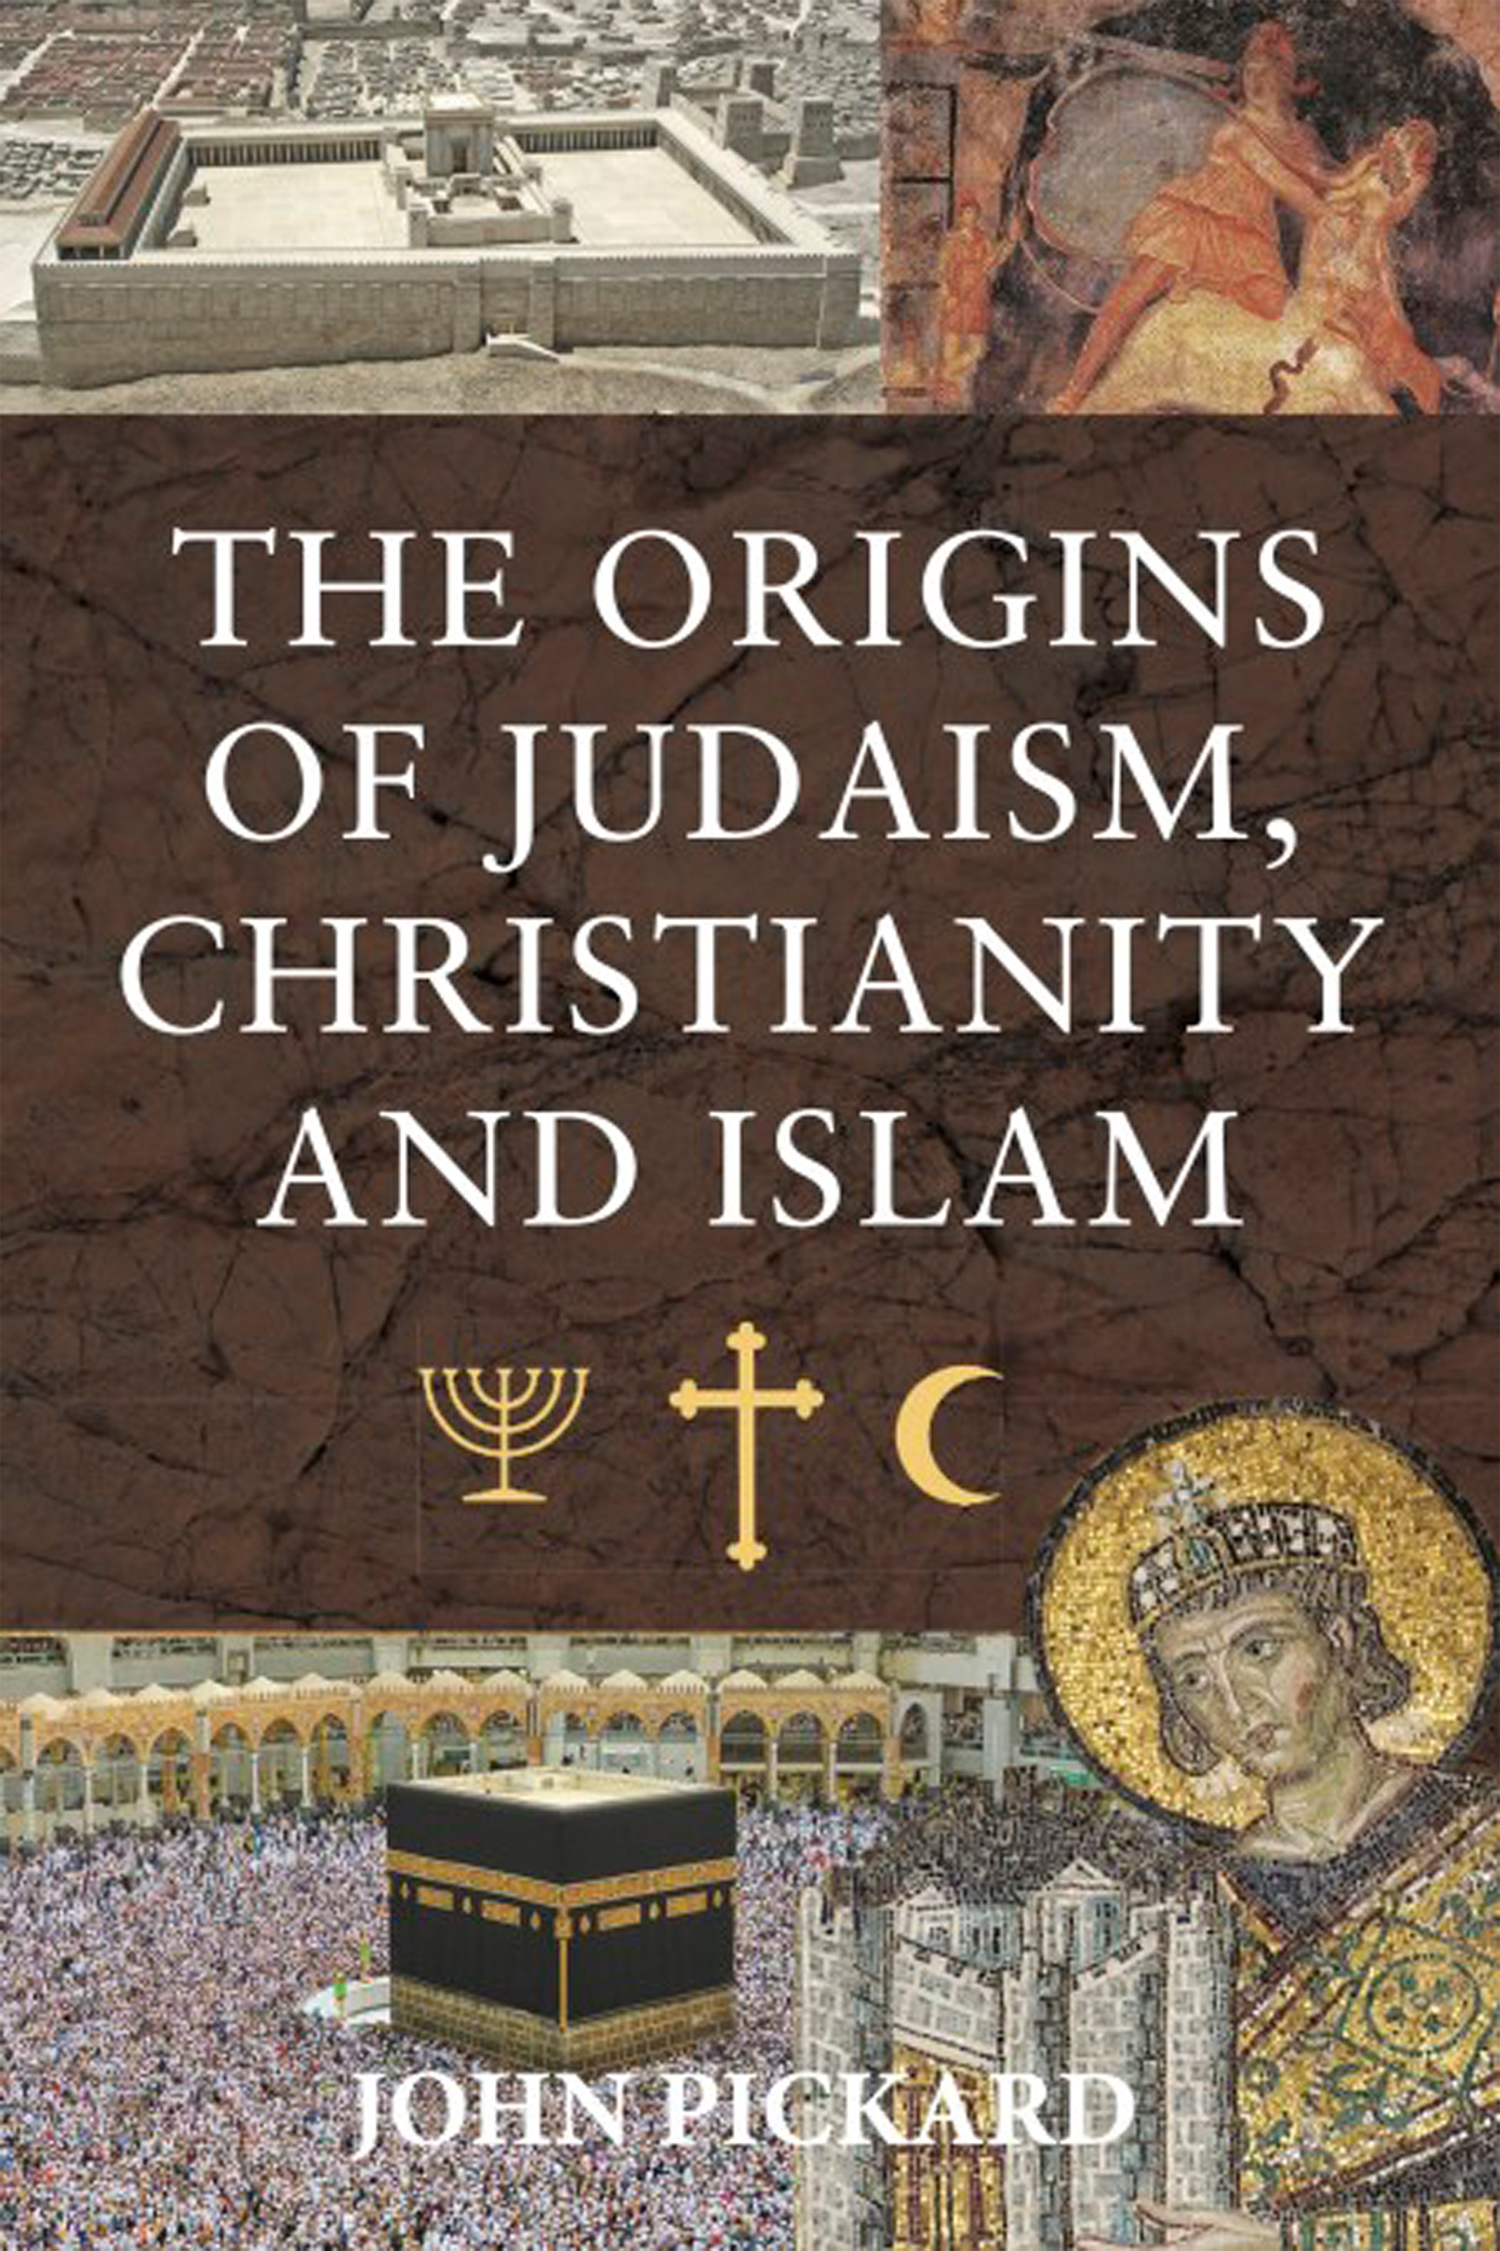 The Origins of Judaism, Christianity and Islam - 25-49.99